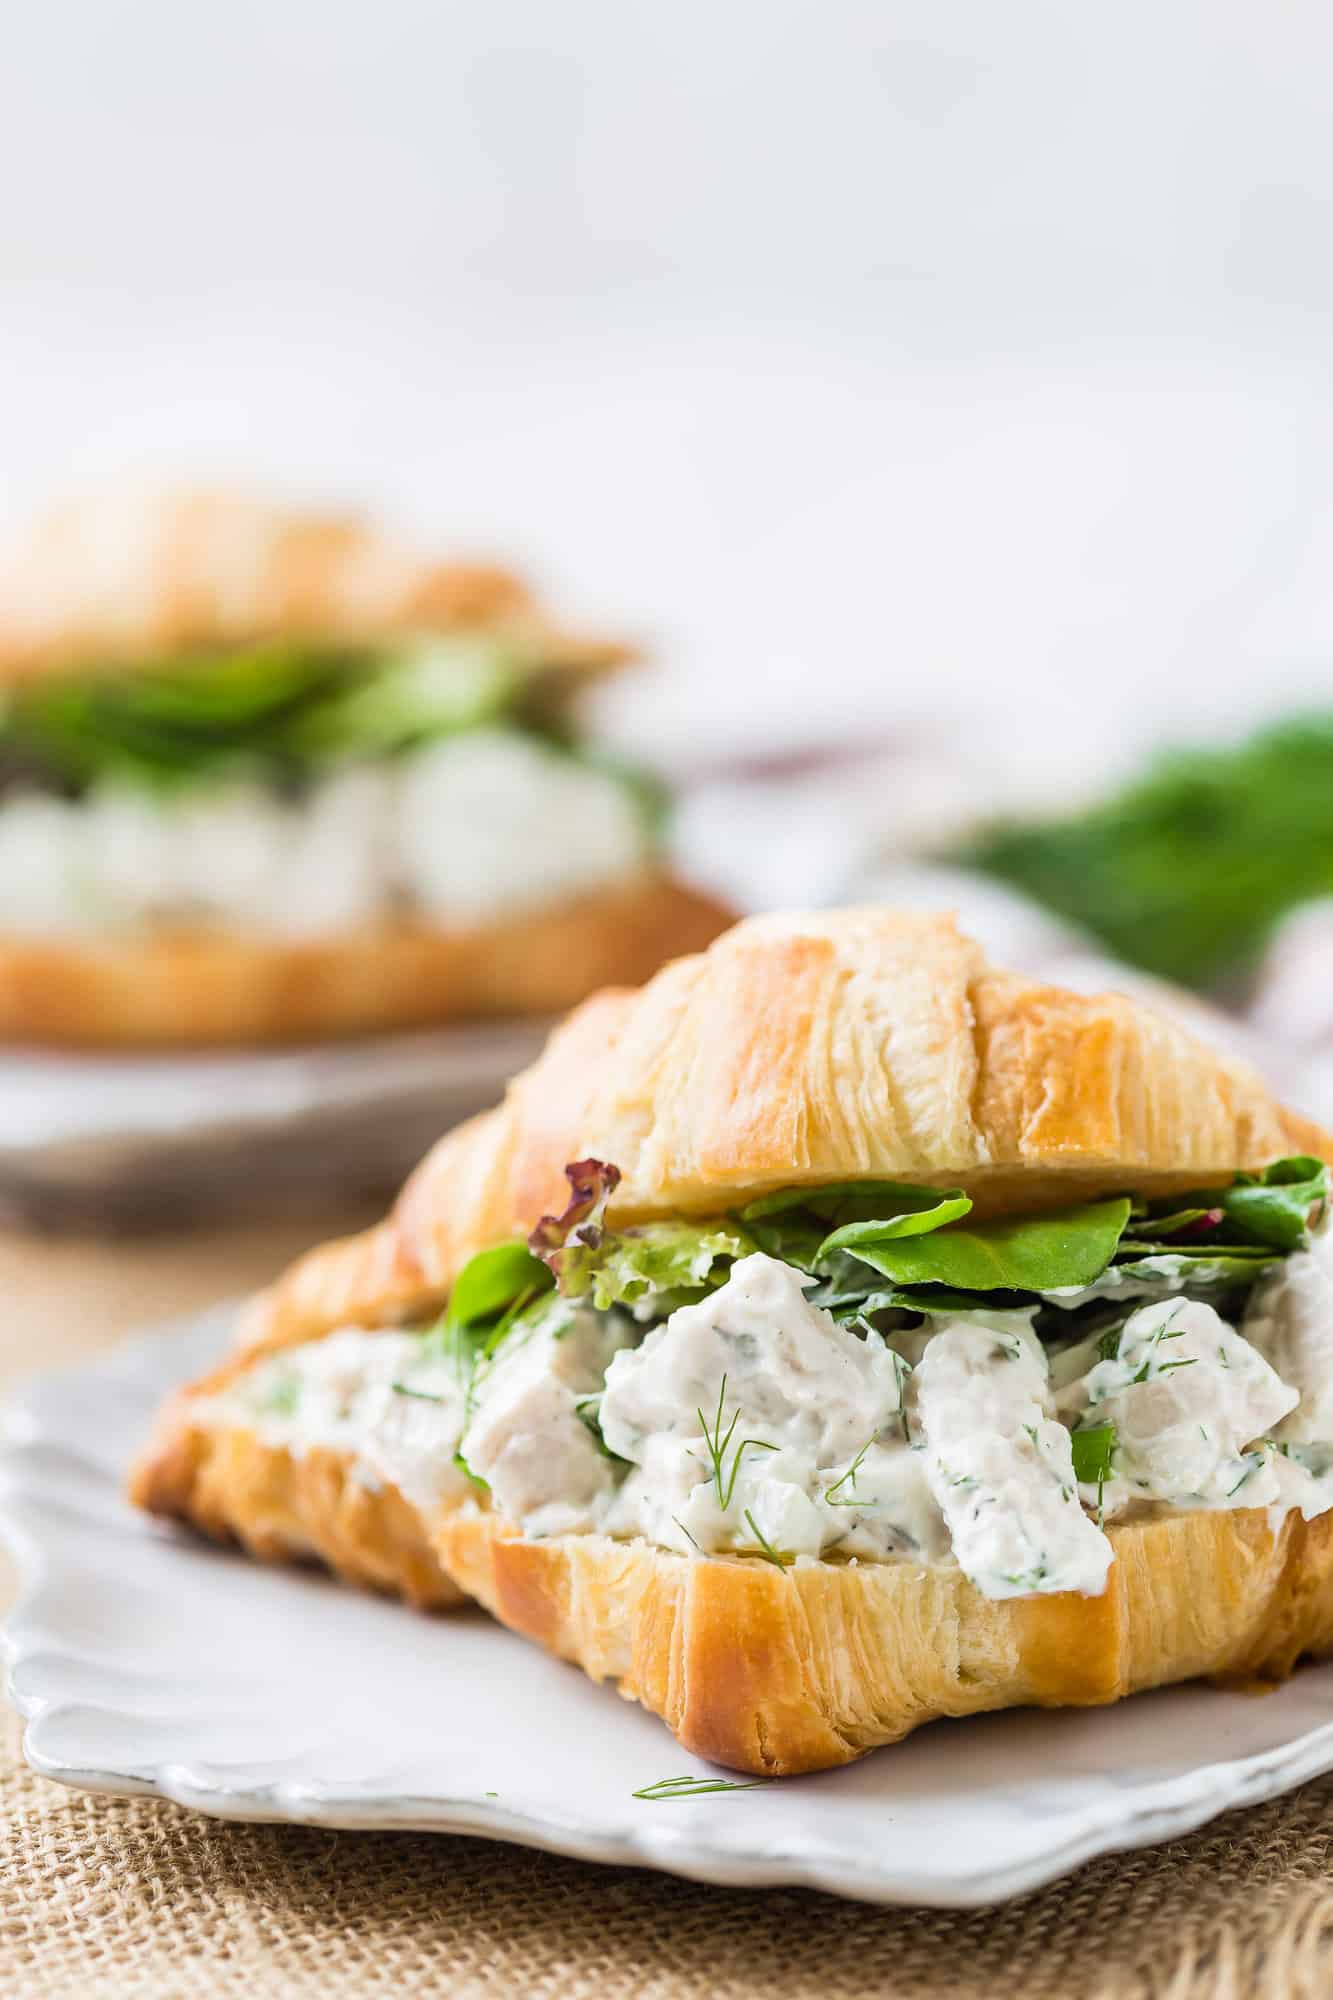 Dill chicken salad and lettuce on croissant.